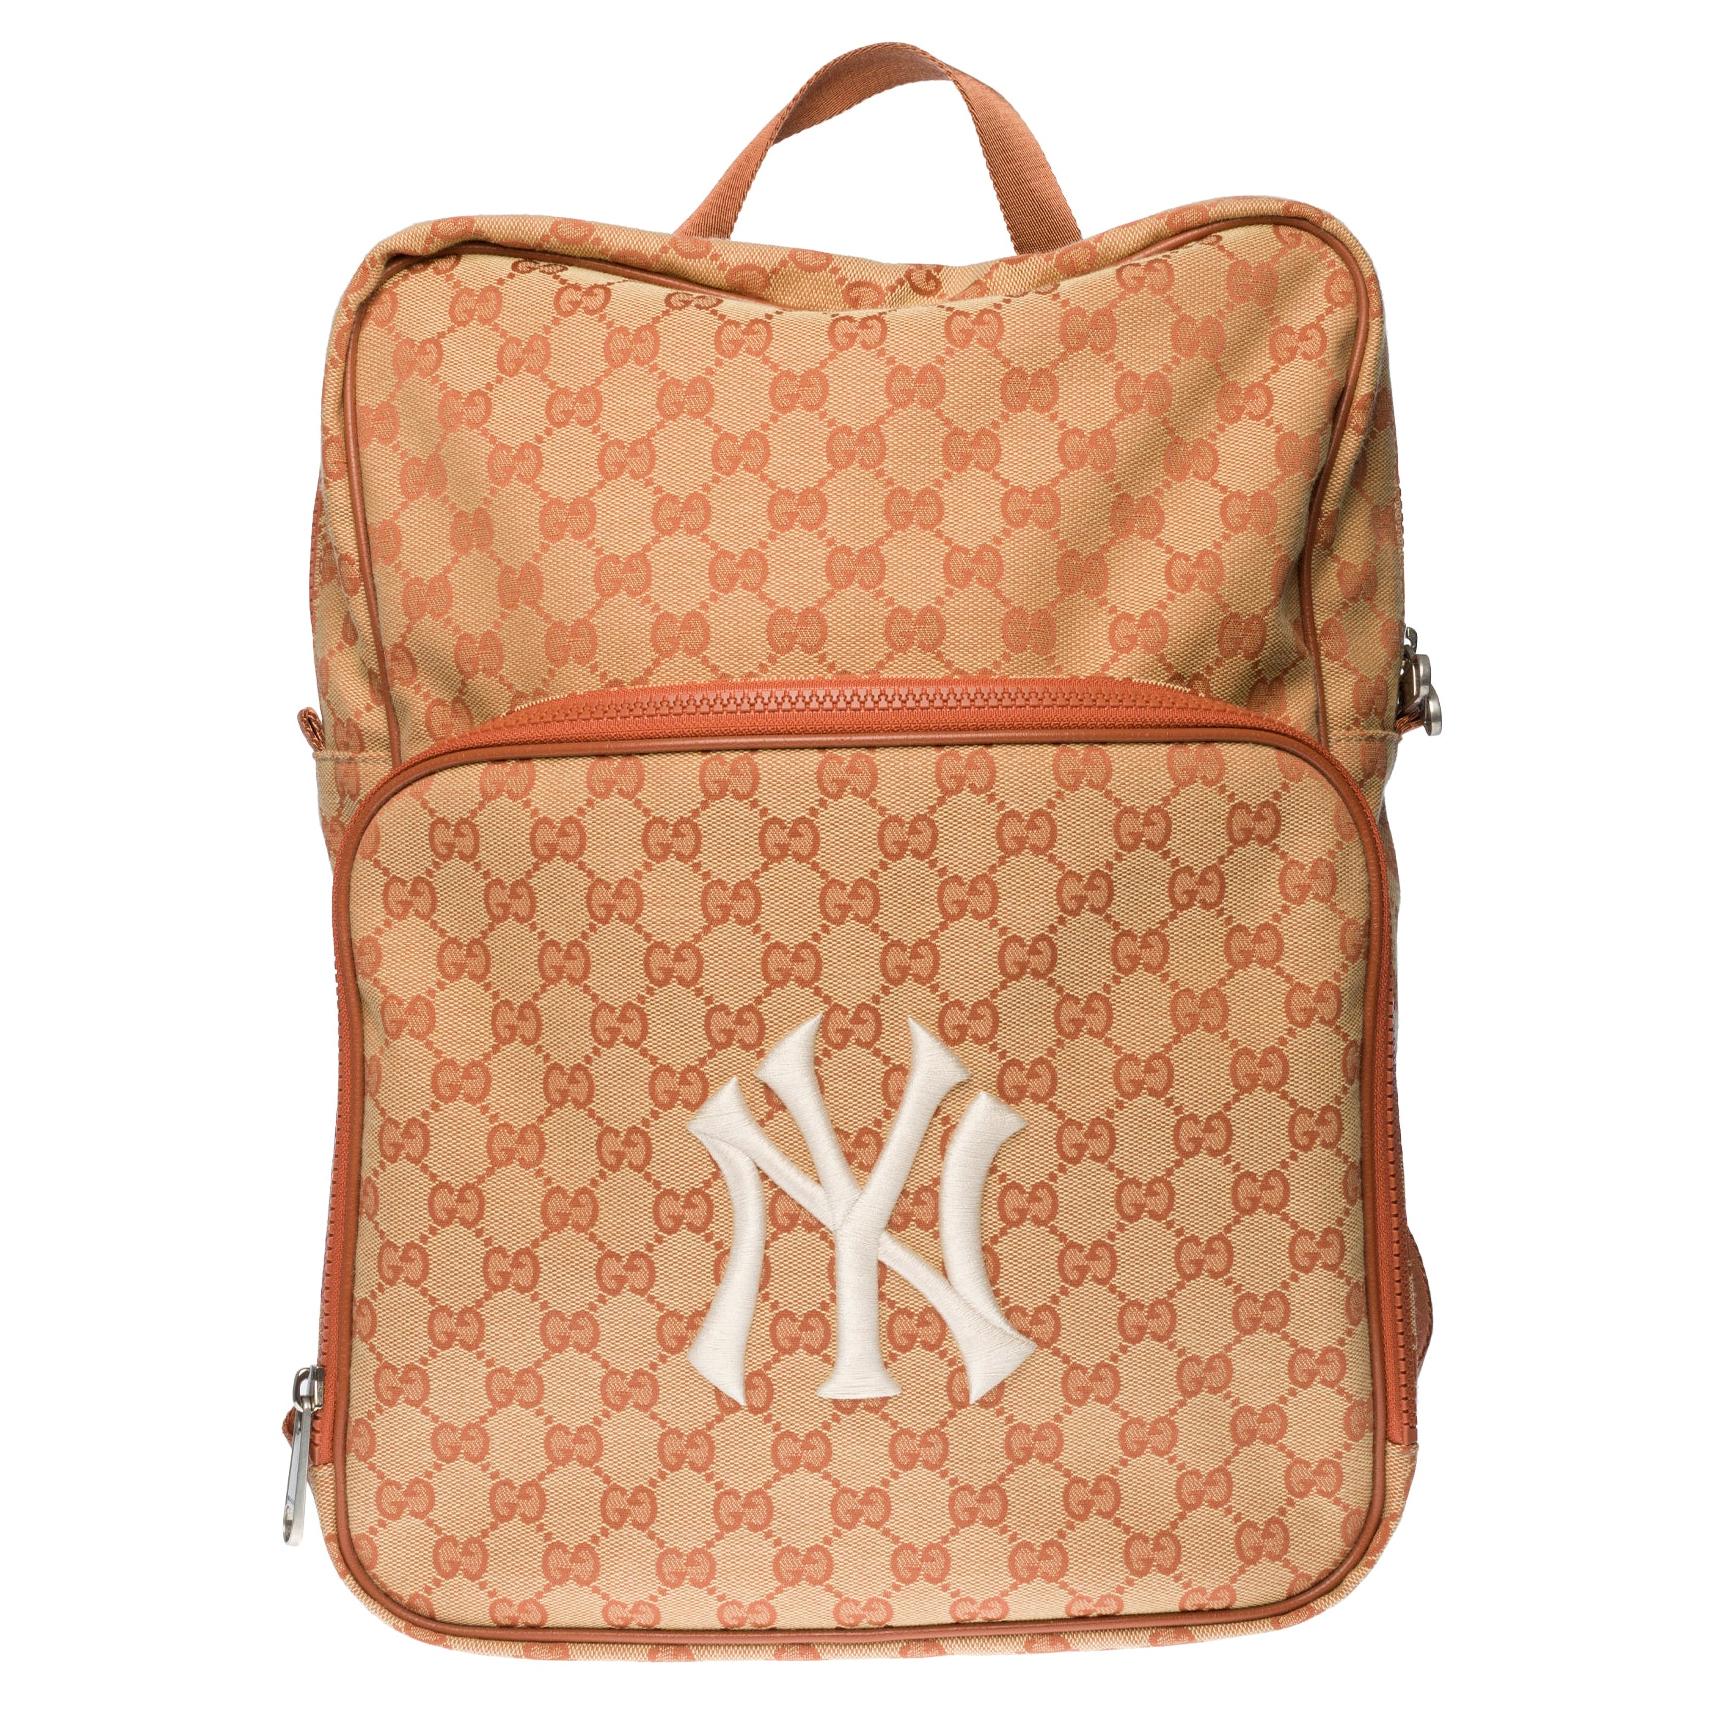 Brand New- Gucci GG NY Yankees Backpack in brown canvas